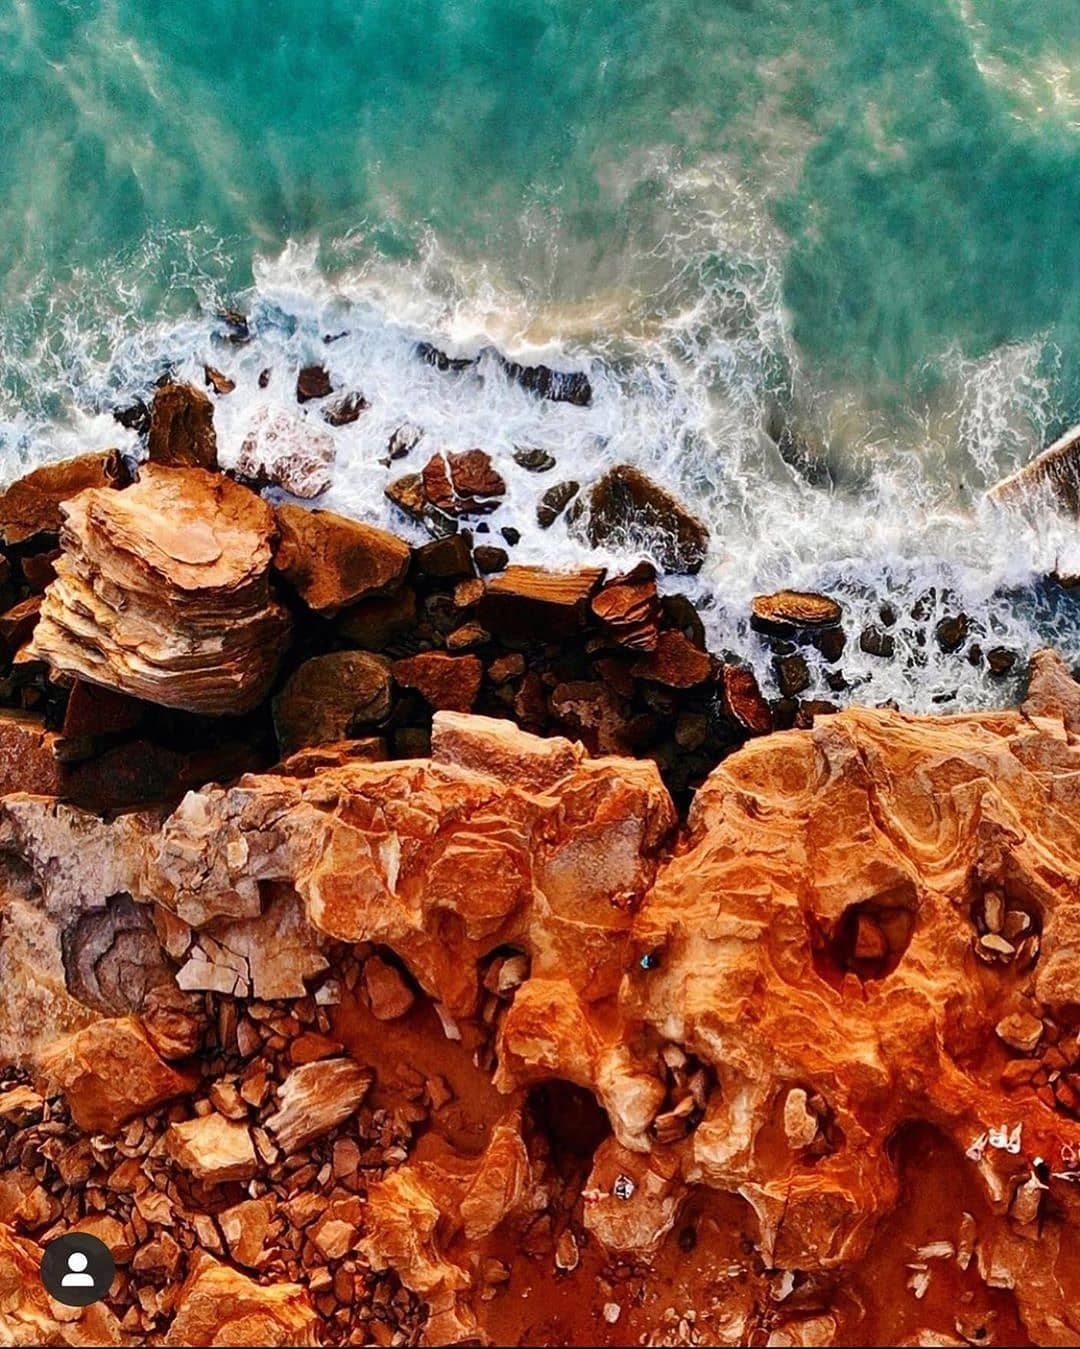 From the red desert to the red rocky beach ▶Reposted from @thekimberleyaustralia As the afternoon sun hits the rocks at Gantheaume Point, all of our favourite colours appear! 😍 This truly is #godscountry #thekimberleyaustralia 
Thanks for sharing @siobhans.pics